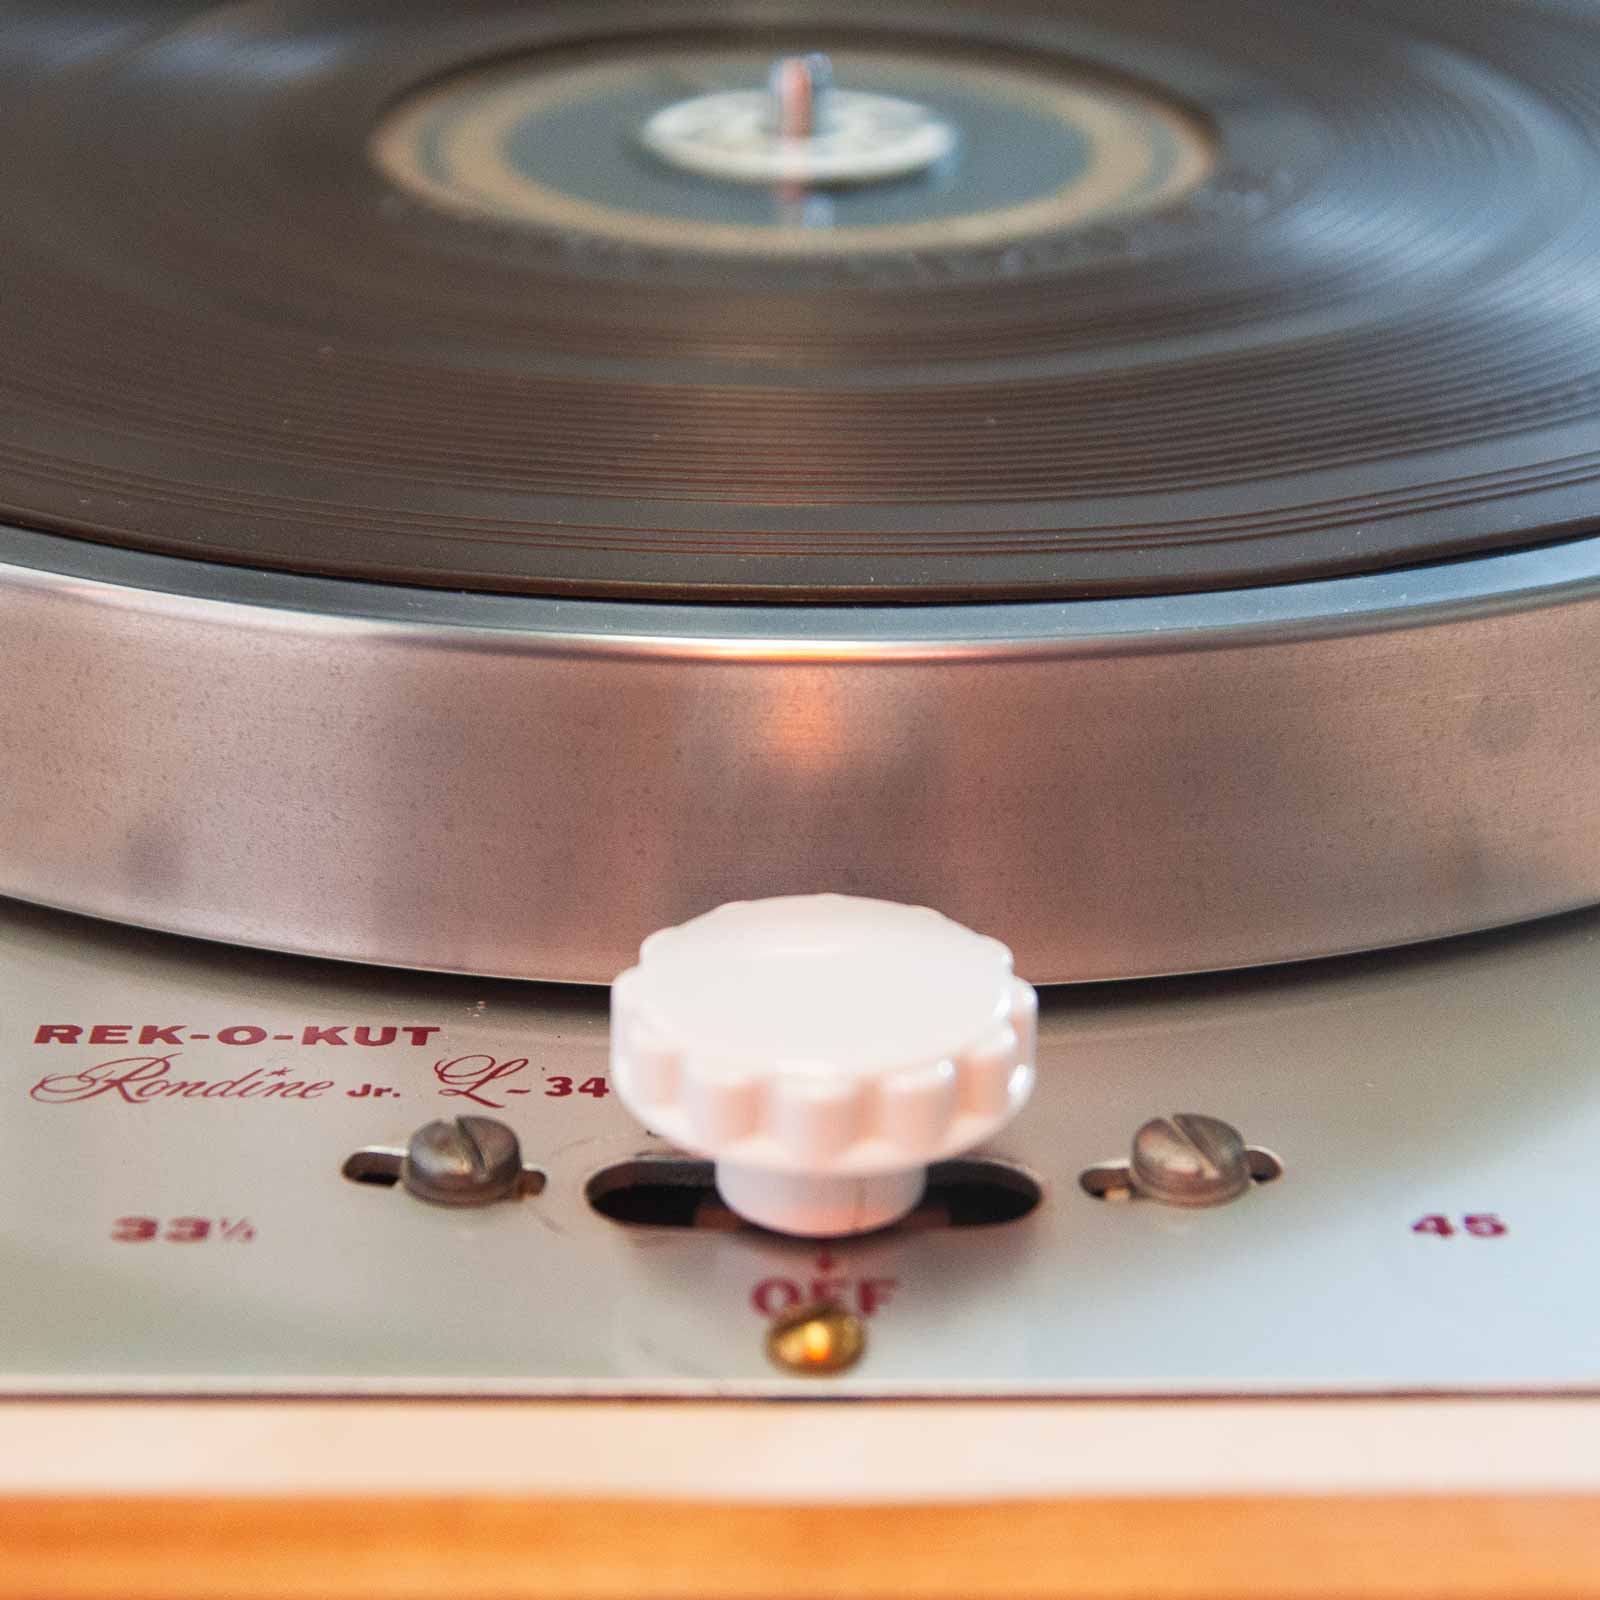 Detail showing turntable switch knob, heavy platter, and rubber slipmat